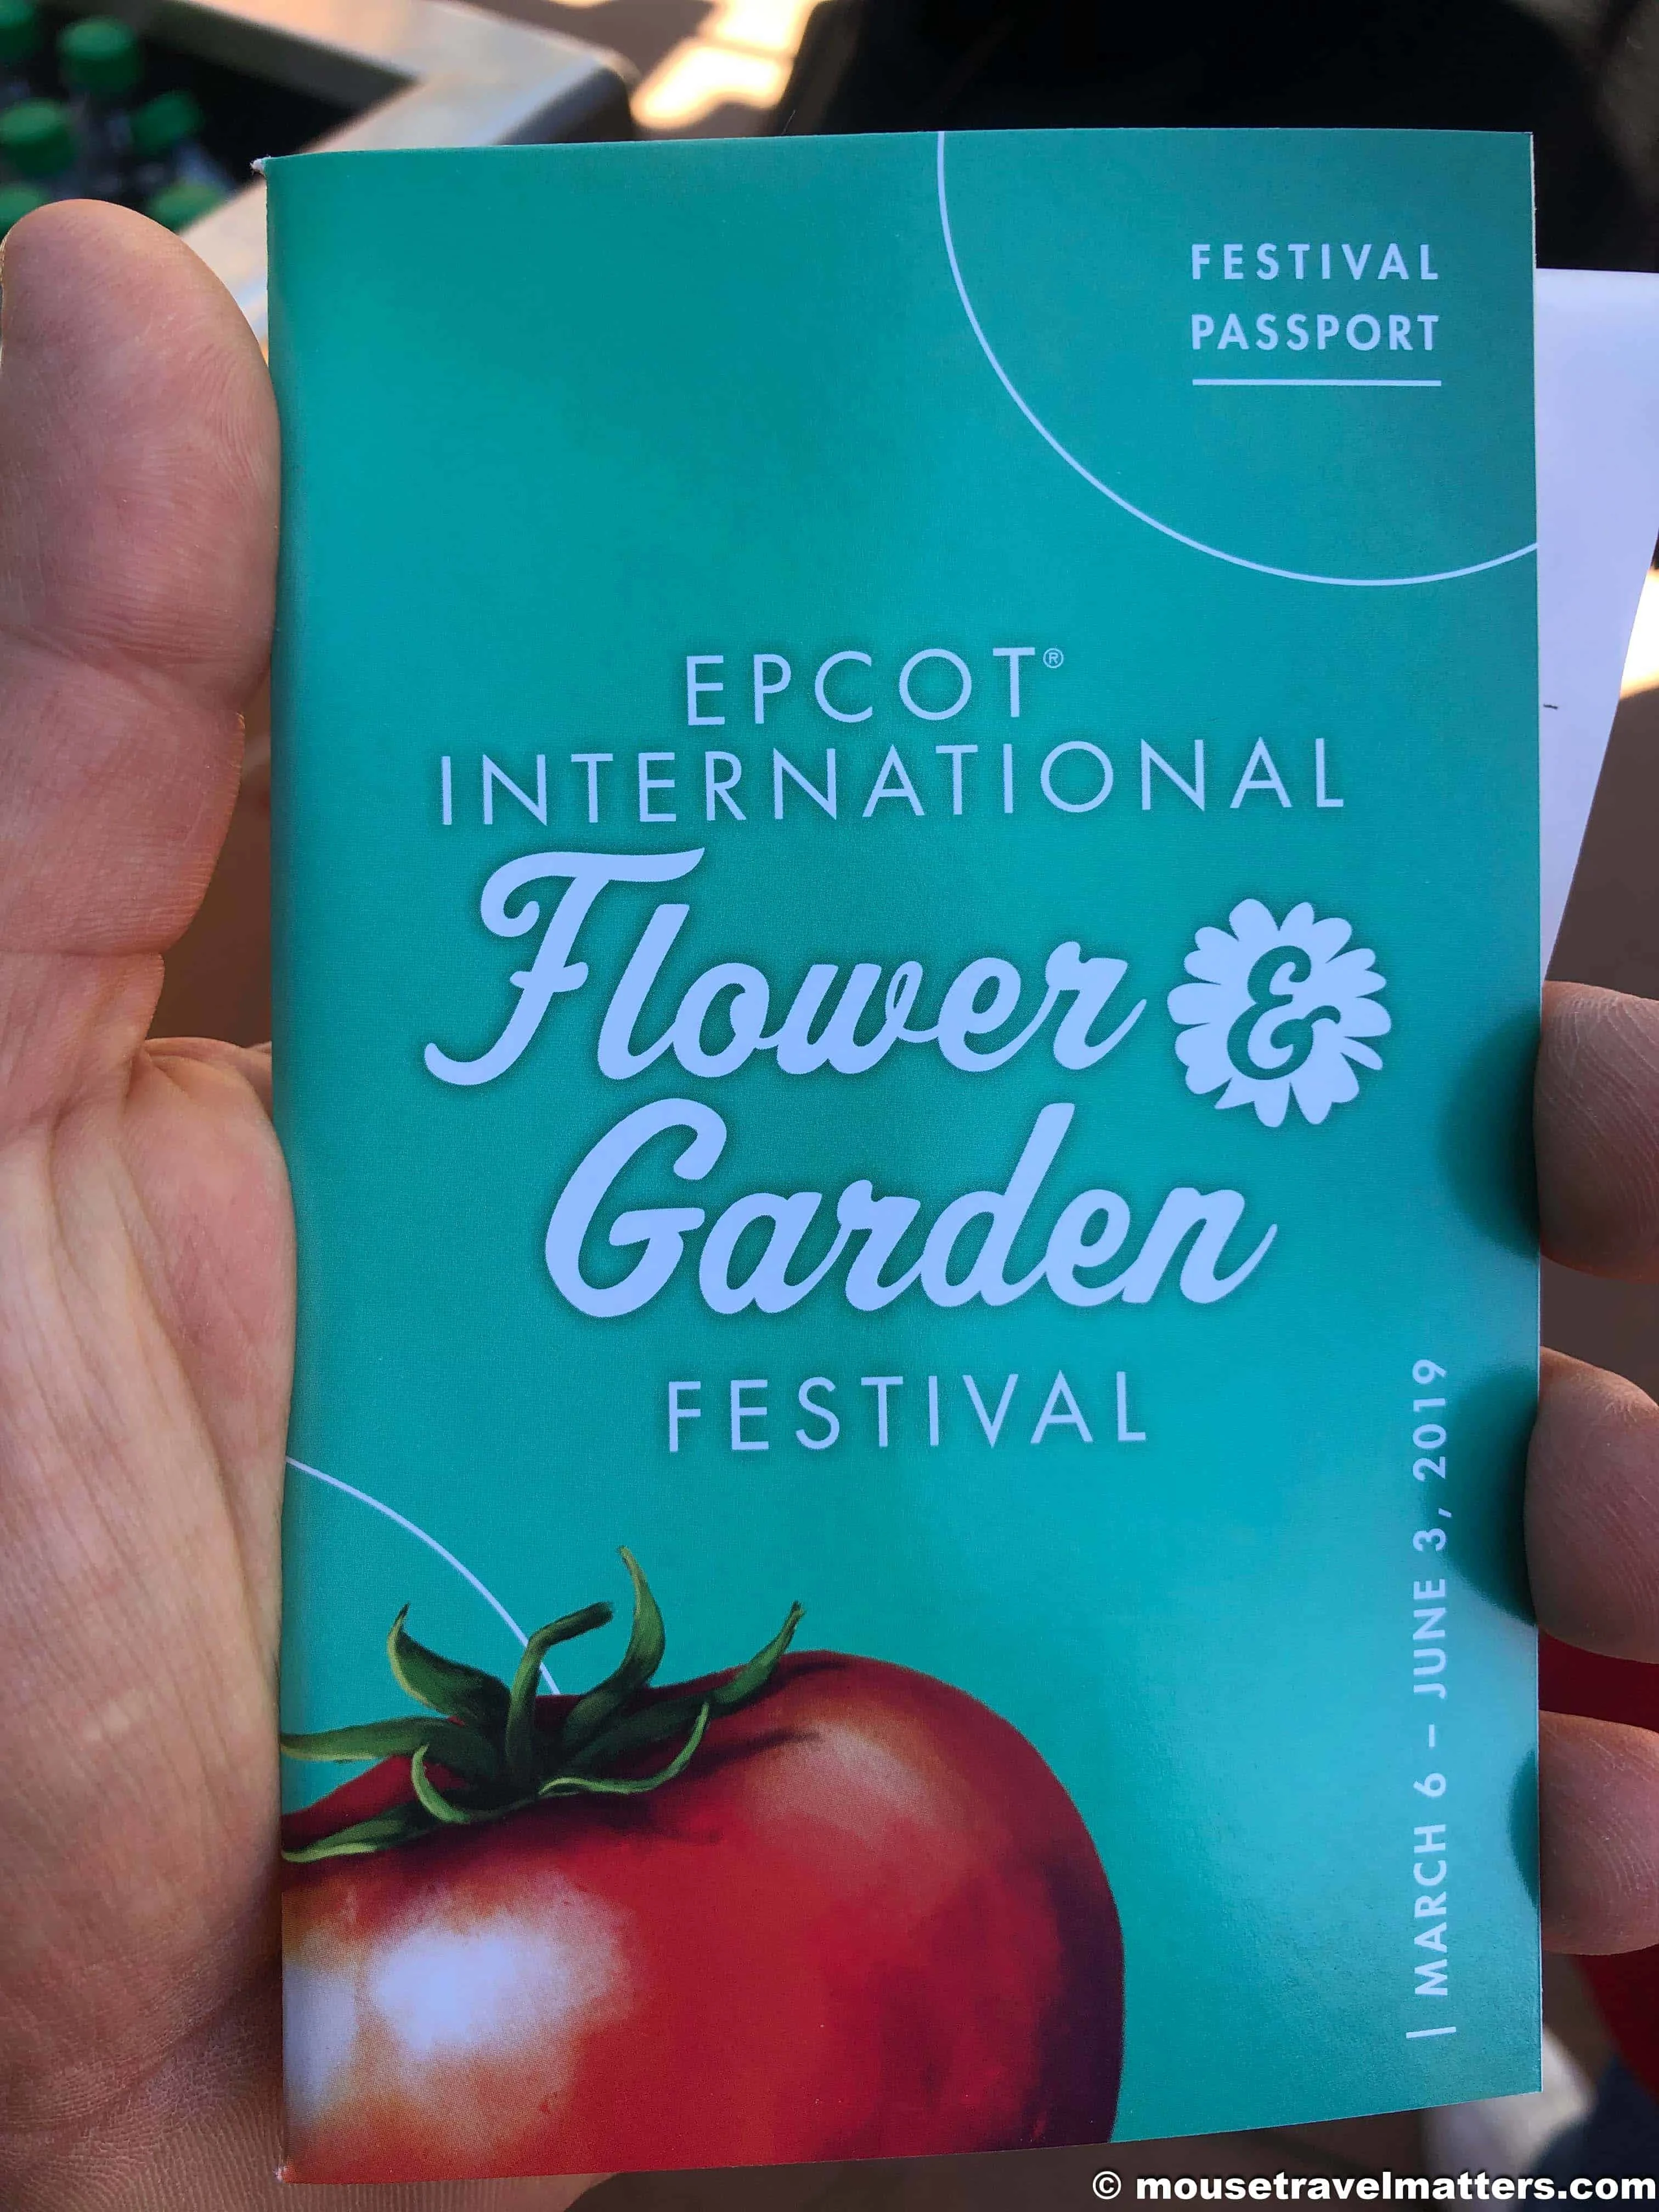 The 2020 Epcot International Flower & Garden Festival runs from March 04 - June 01, 2020, at Walt Disney World. This guide covers our tips & tricks for experiencing everything Epcot's Flower and Garden Festival has to offer. #wdw #epcotfestival #epcotflowerandgarden #2020epcotflowerandgardenfestival
